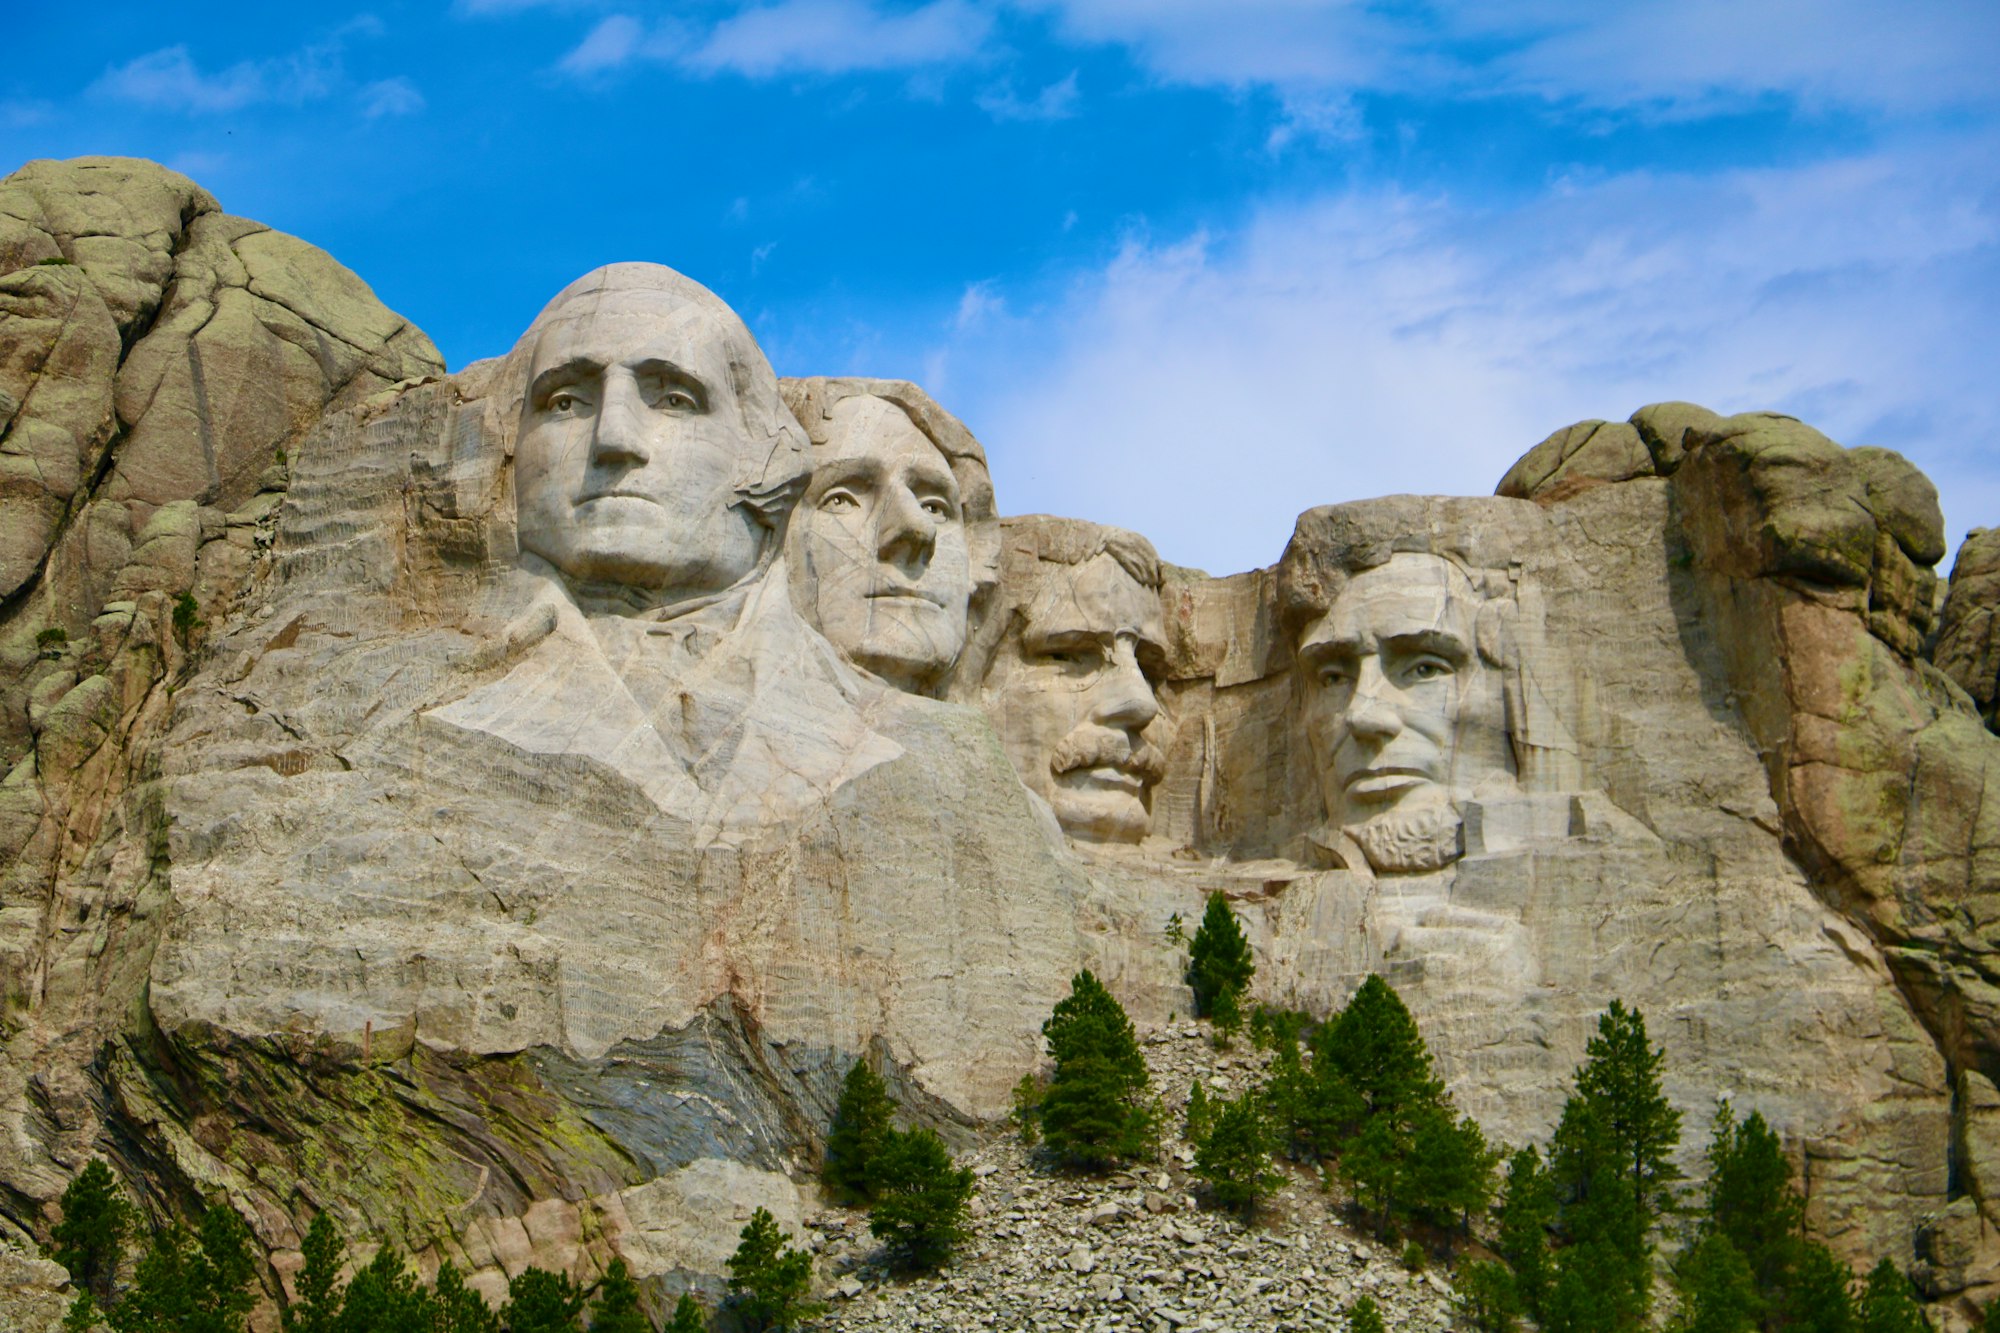 Which Political Party Has The Most U.S. Presidents?